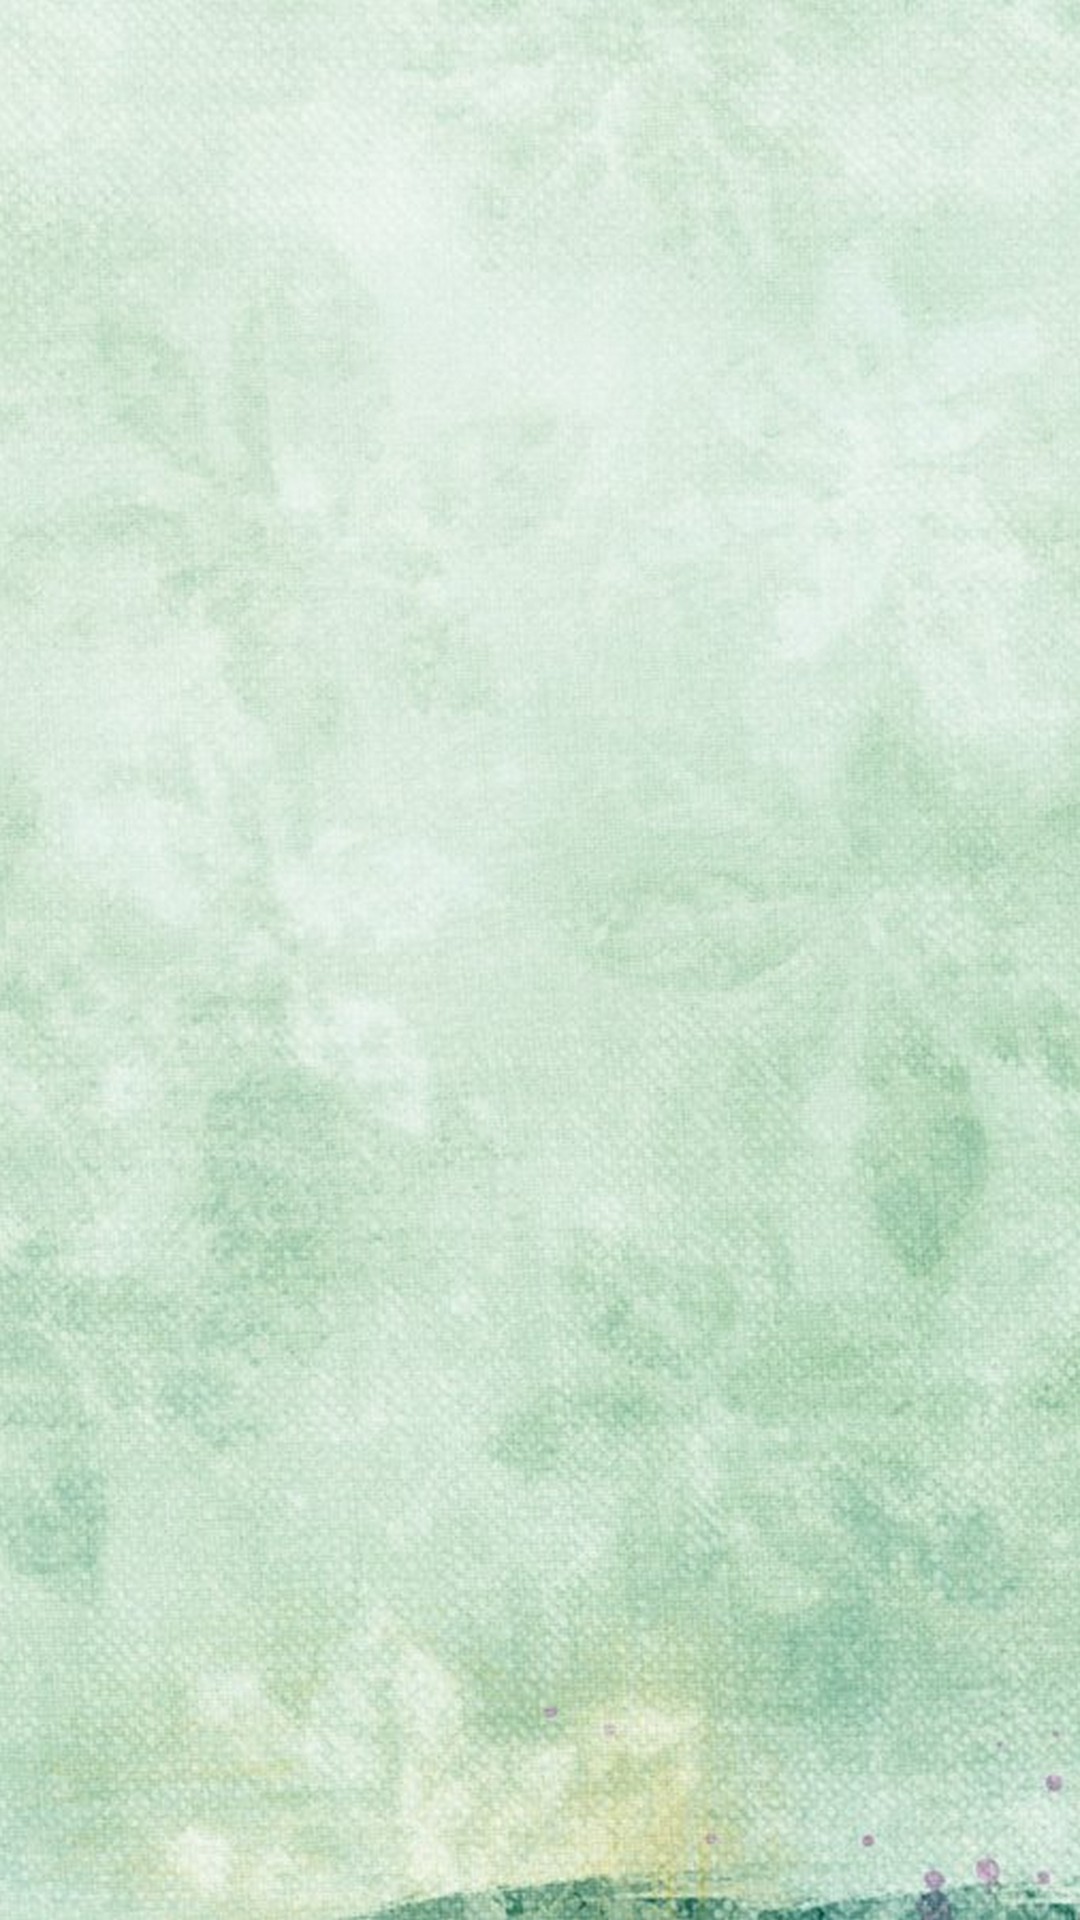 Mint Green Wallpaper For Android - 2020